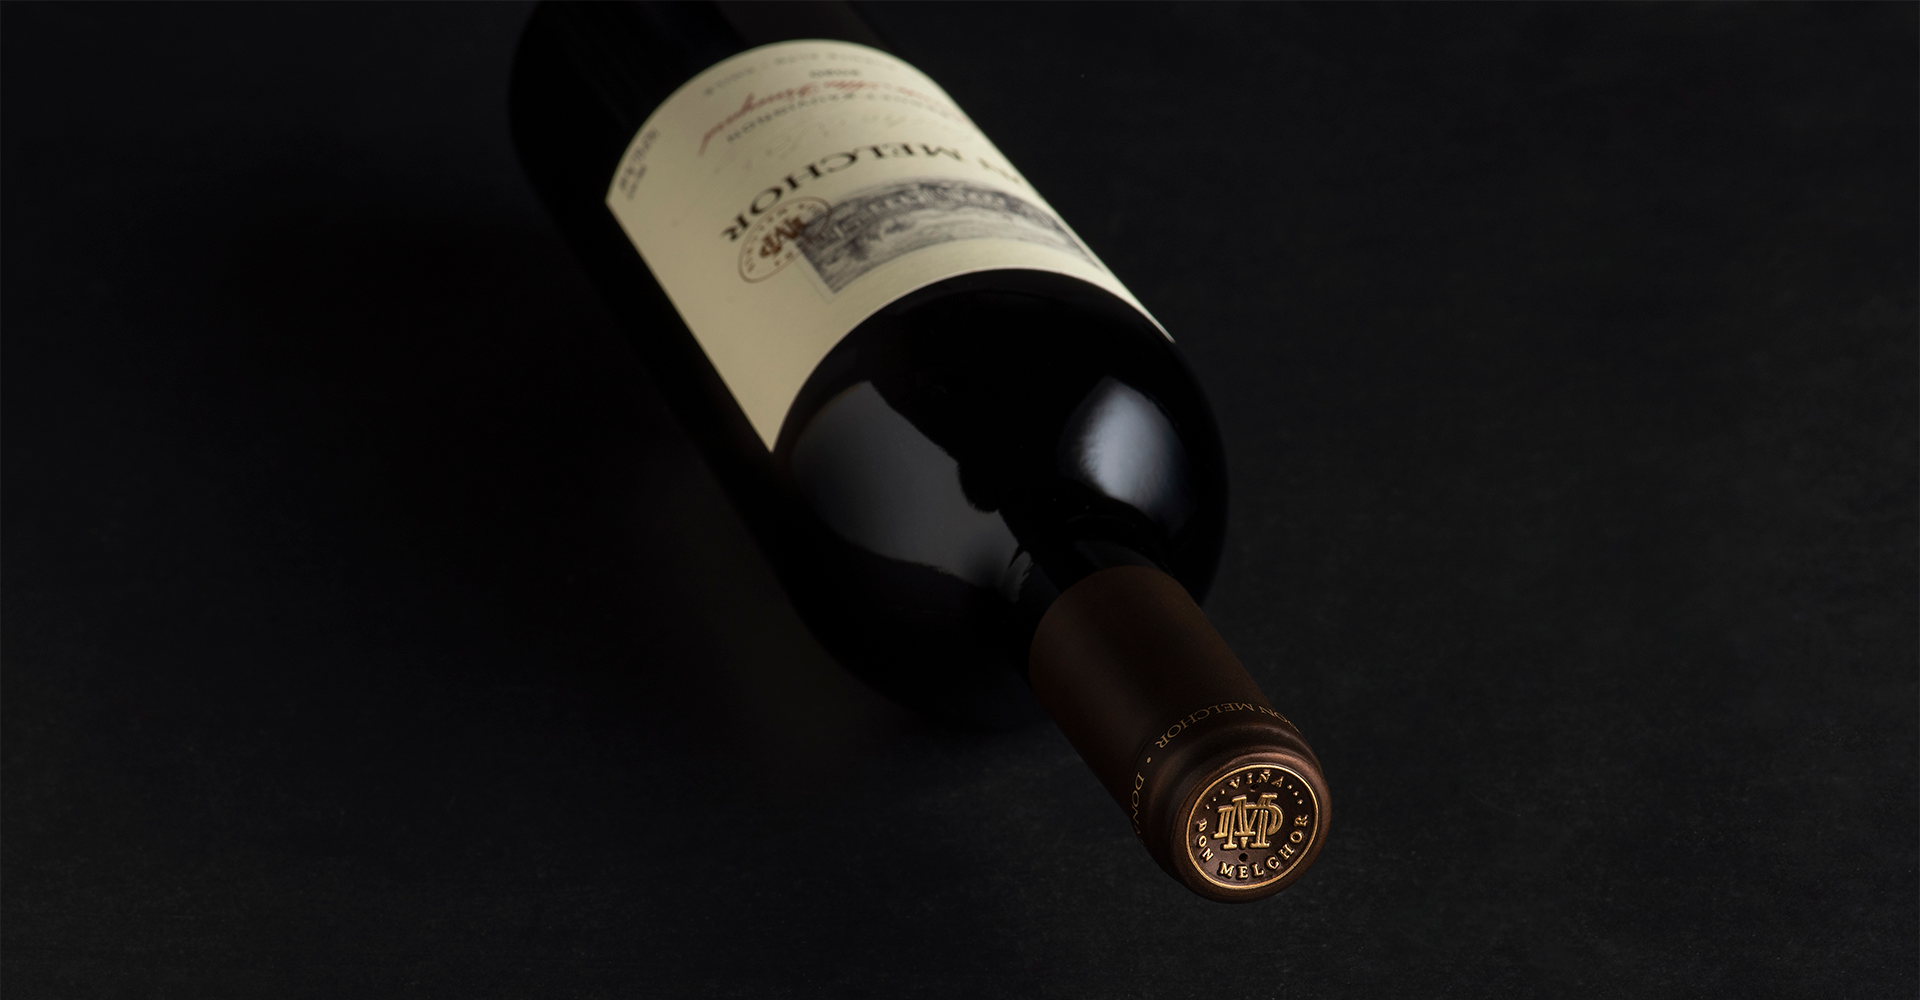 Robb Report distinguishes Don Melchor 2020 as a world-class wine